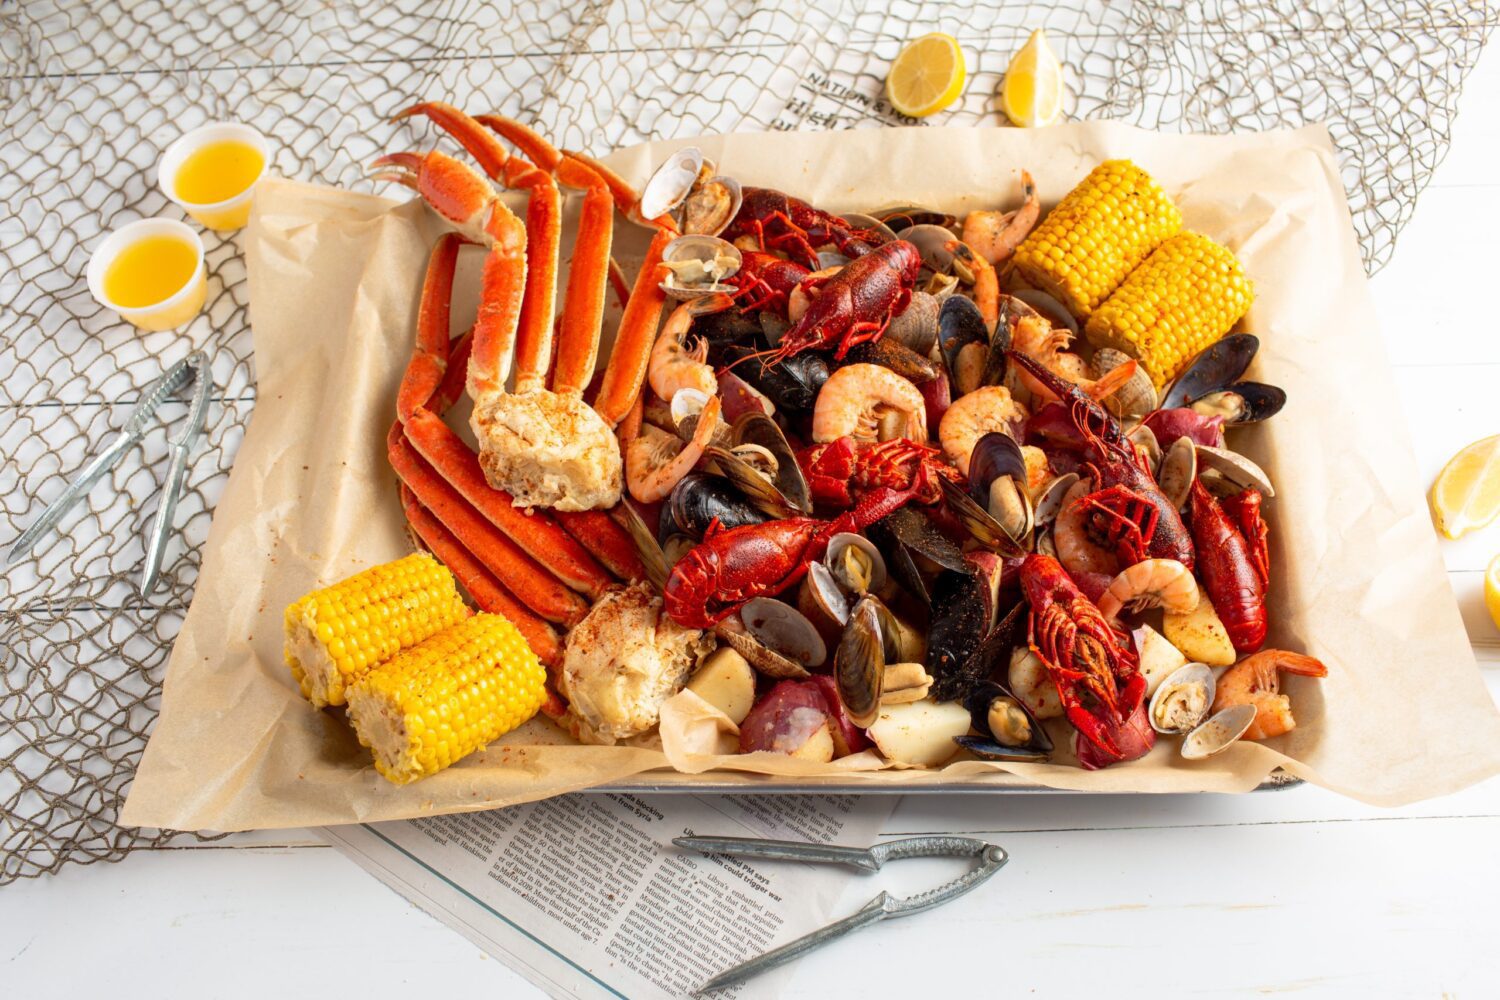 Seafood boil containing crab legs, shrimp, clams, corn on the cob and lemon